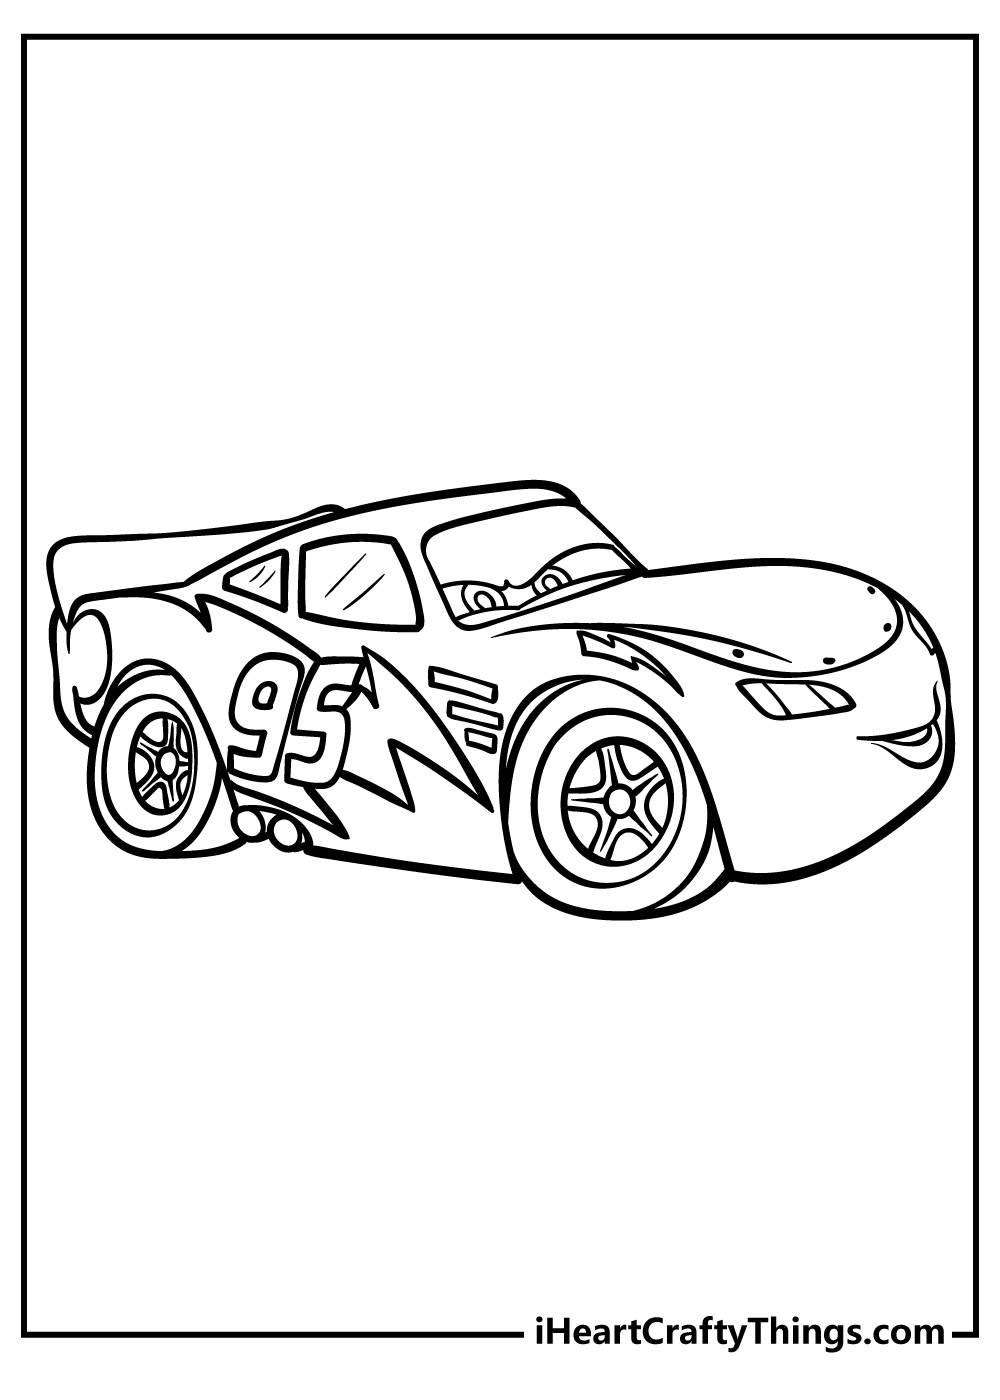 Lightning McQueen Coloring Pages free pdf download